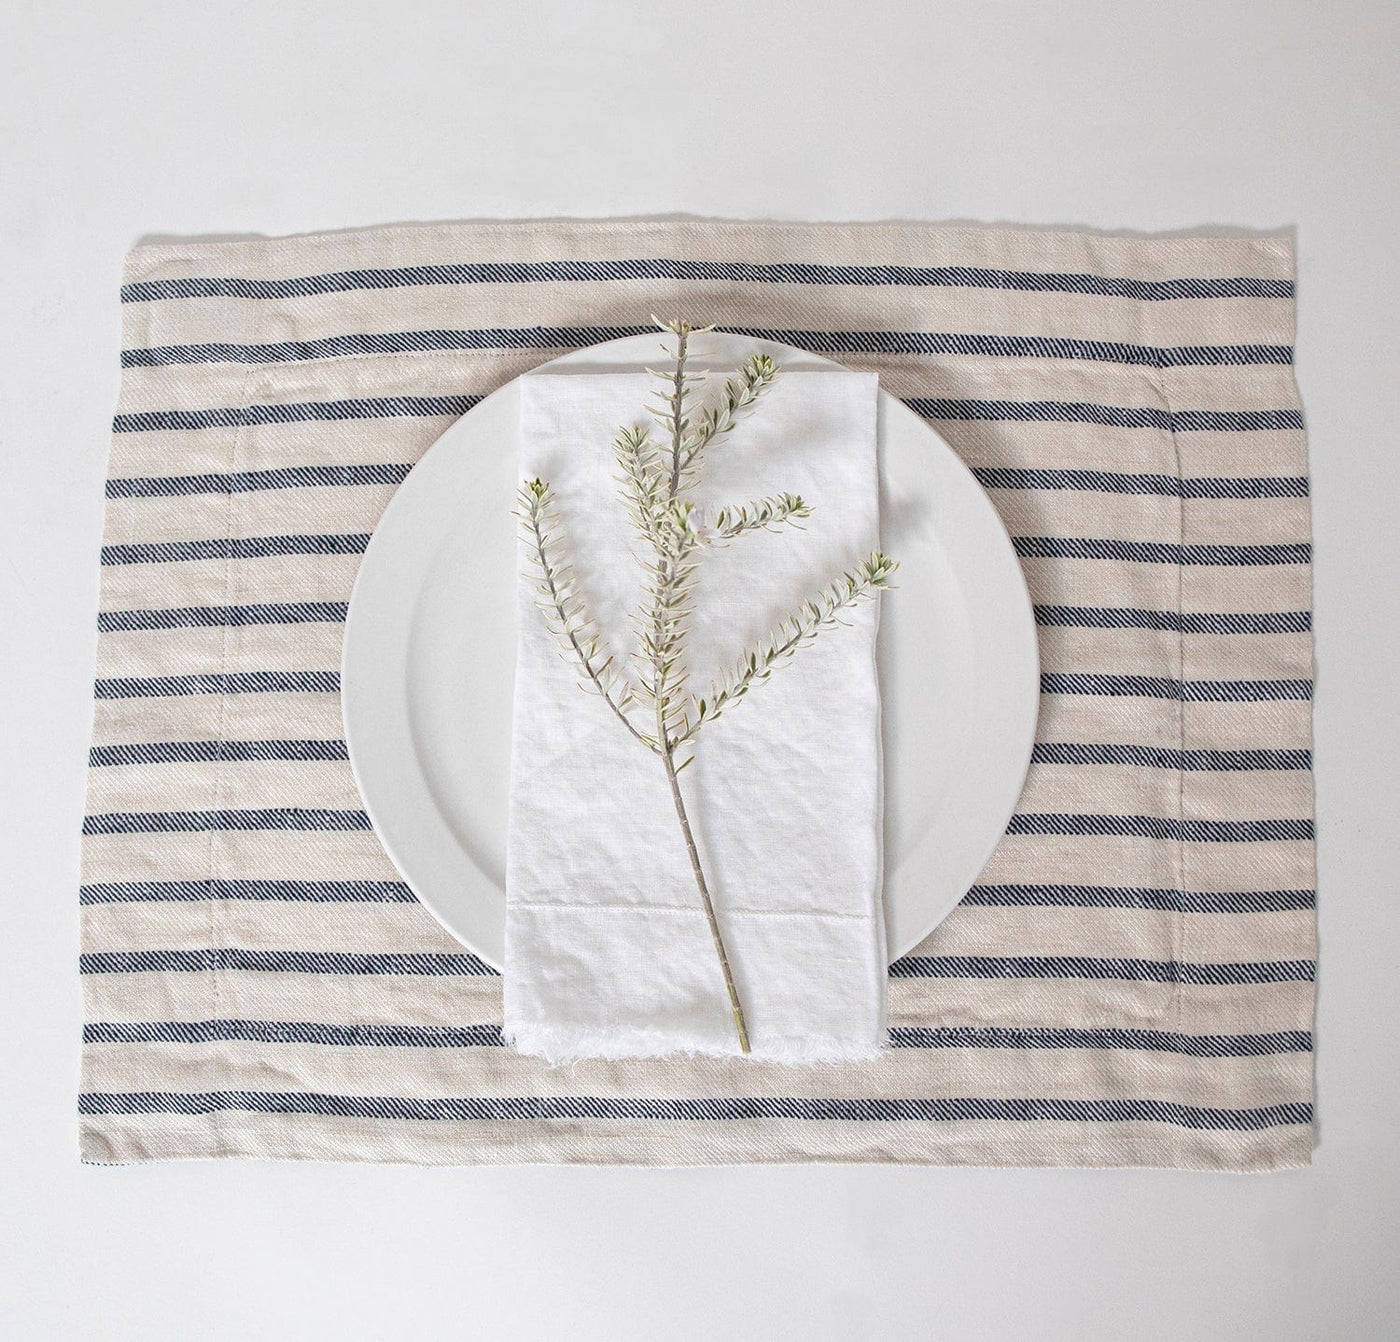 100% Pure Linen Table Runners & Placemats | by Rough Linen